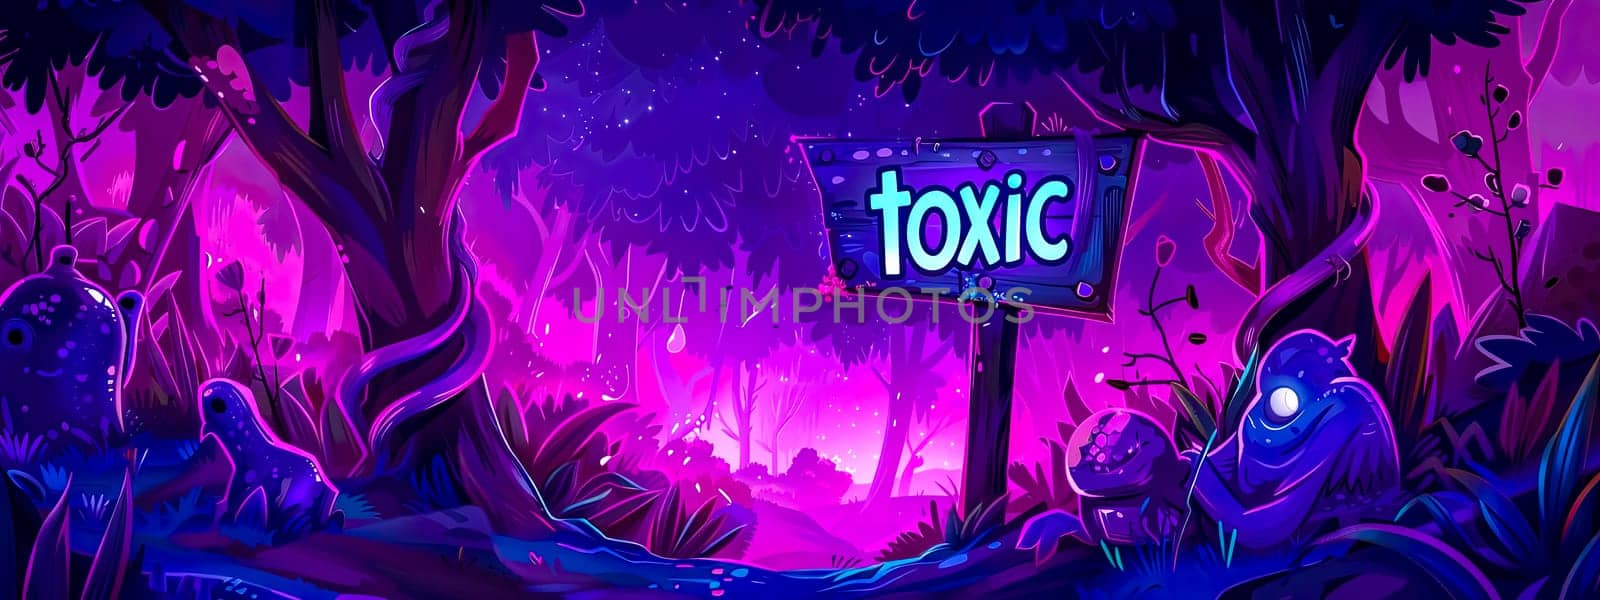 Vibrant illustration of a mystical forest with a toxic sign, under a starry night sky